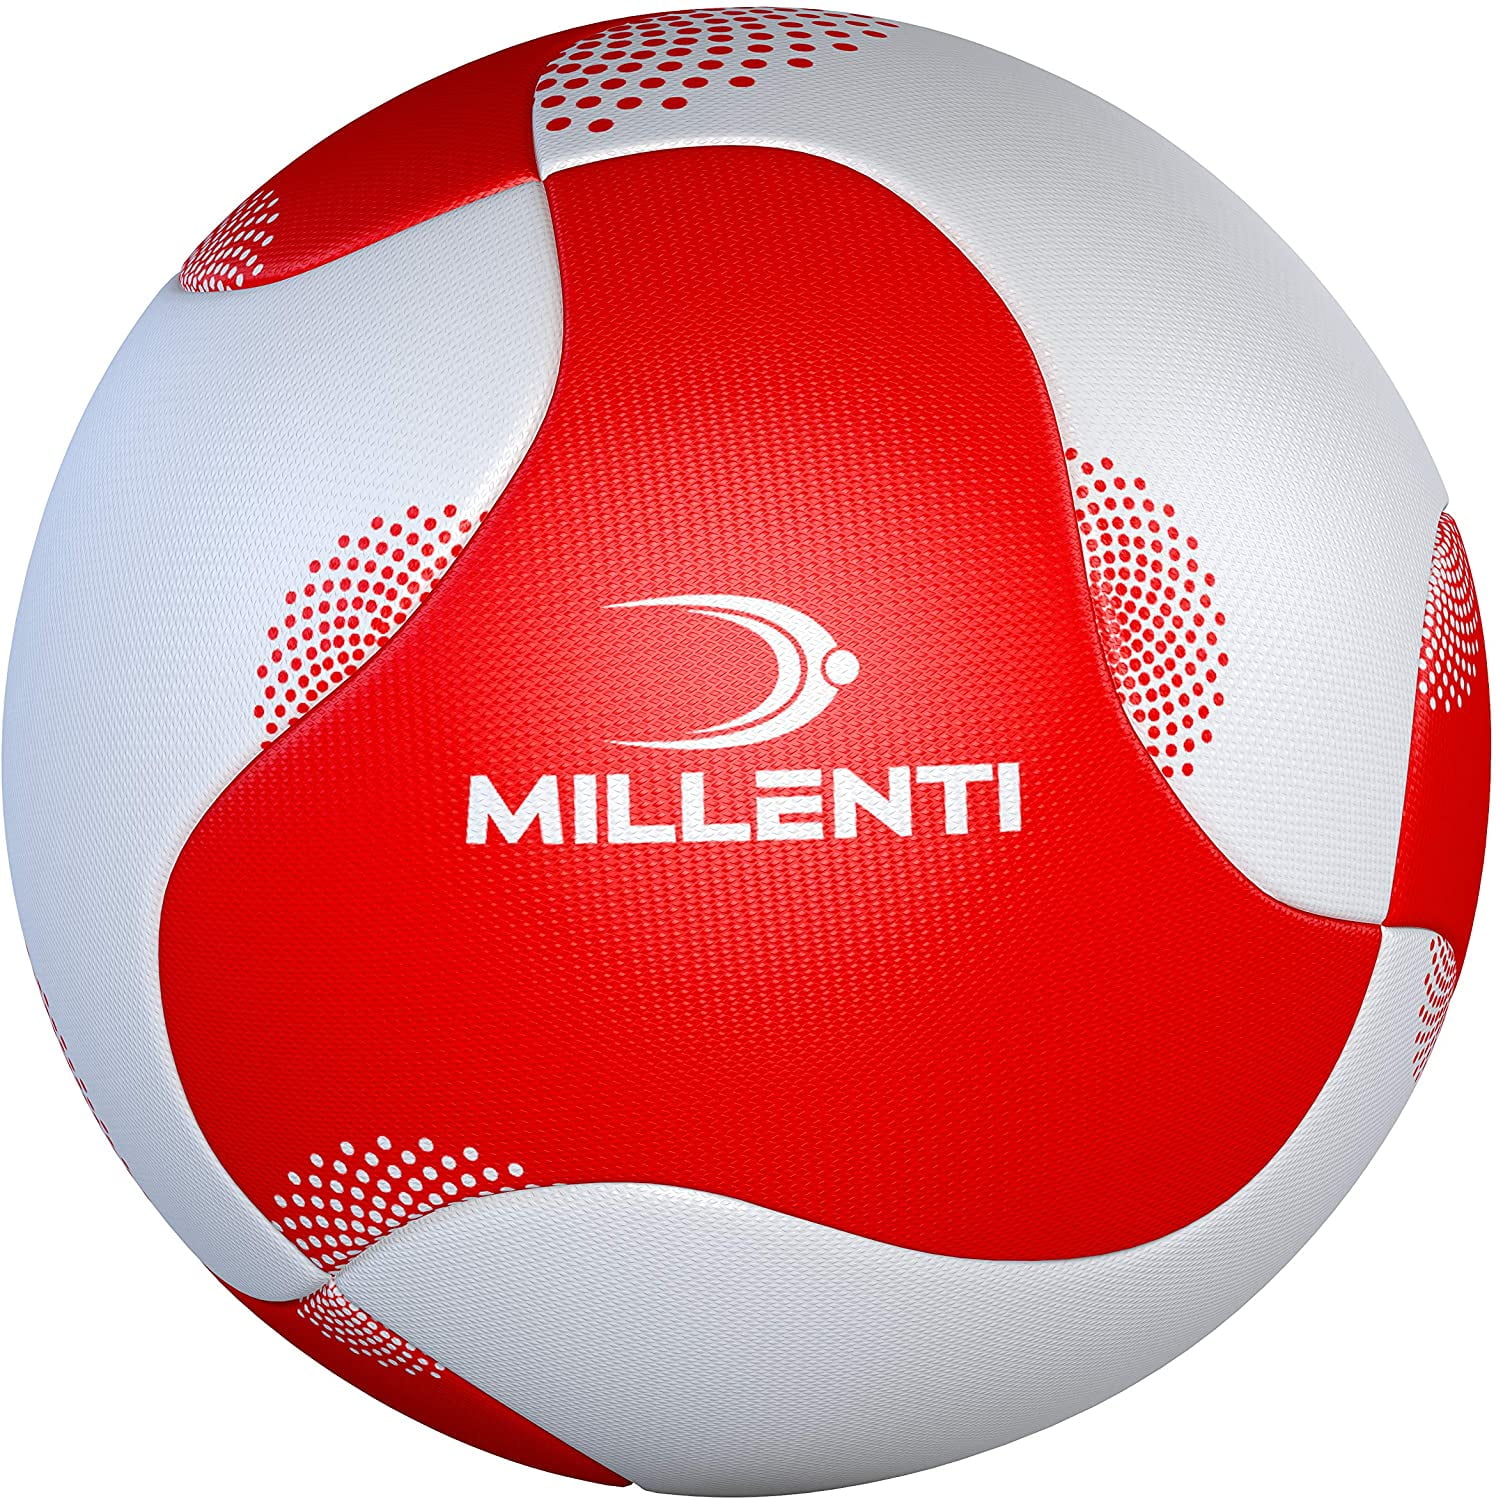 Top Rated Products in Soccer Balls